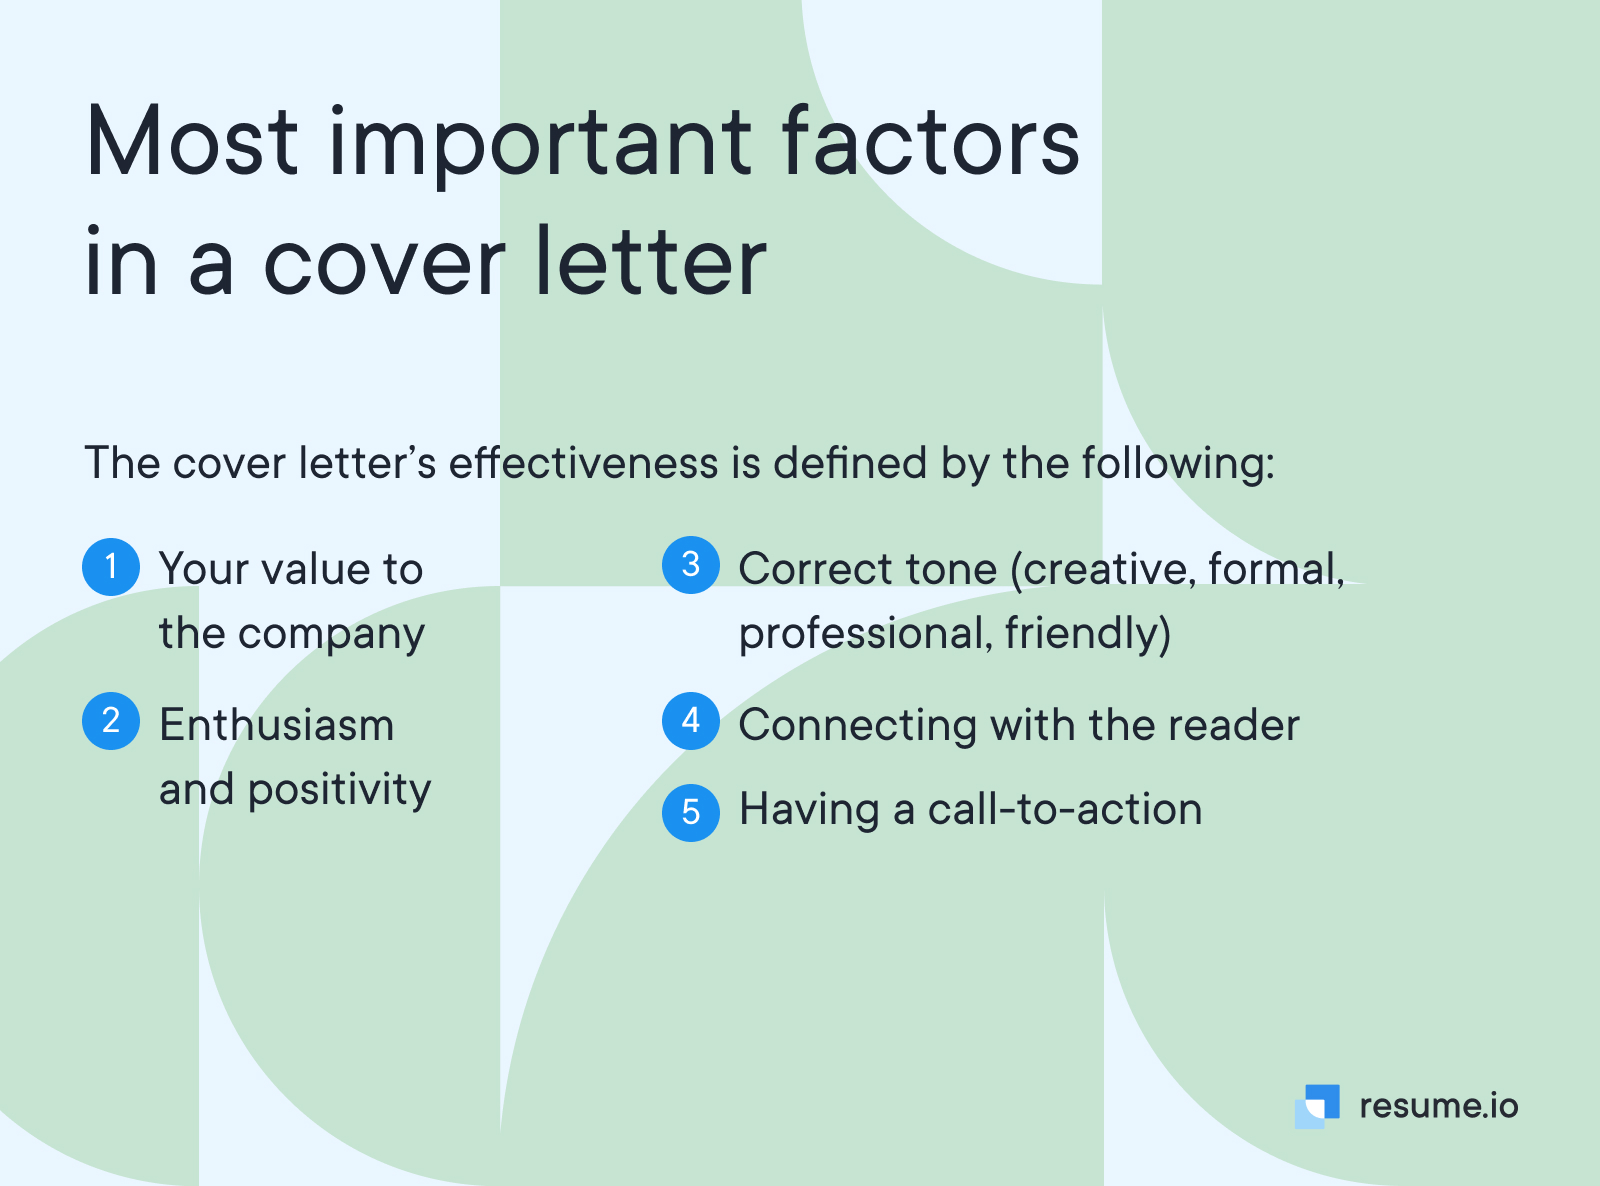 Most important factors in a cover letter